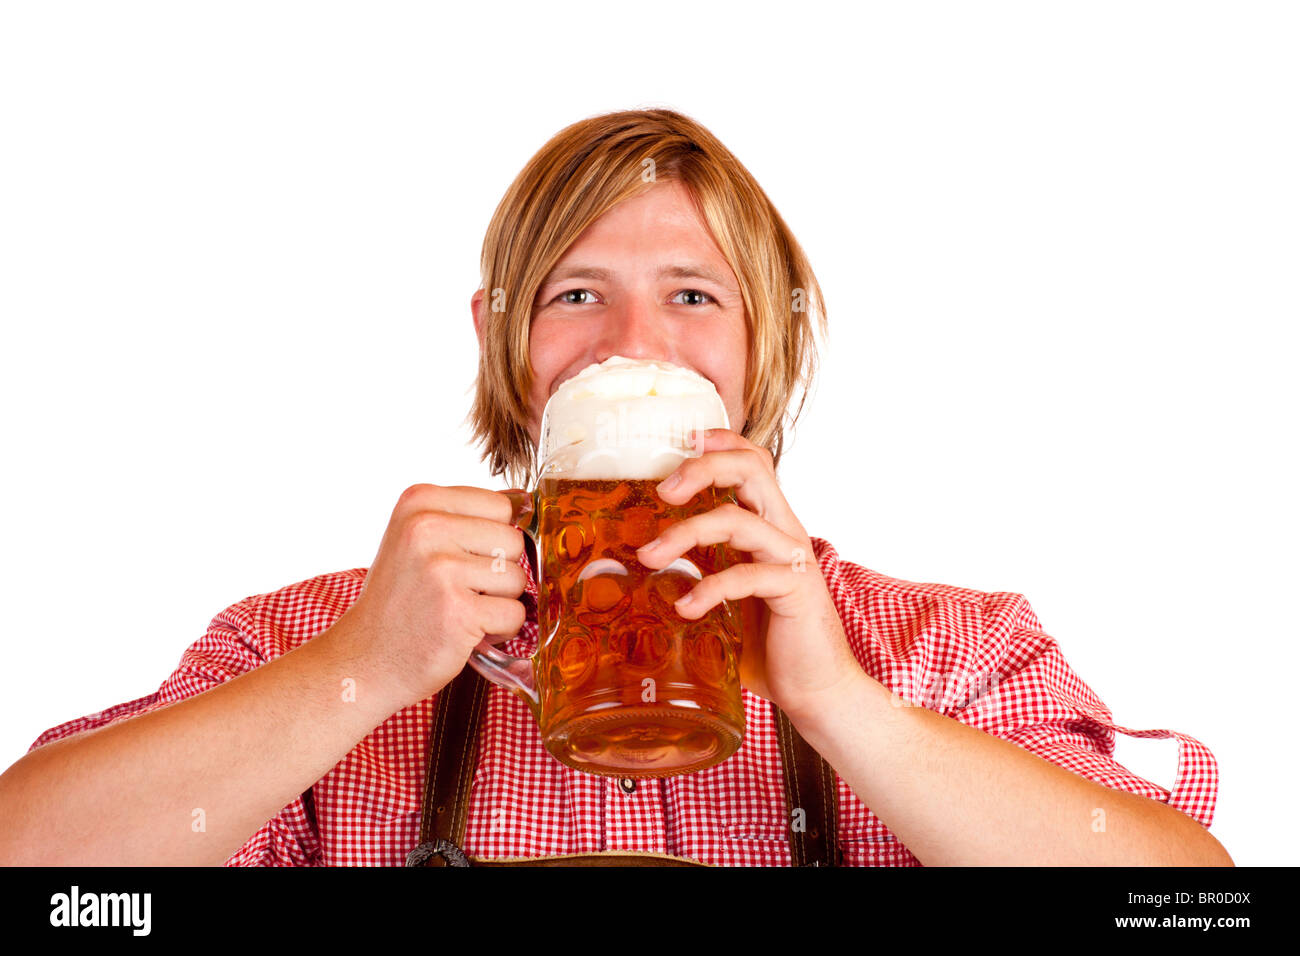 Happy Bavarian man drinks out of Oktoberfest beer stein. Isolated on white background. Stock Photo